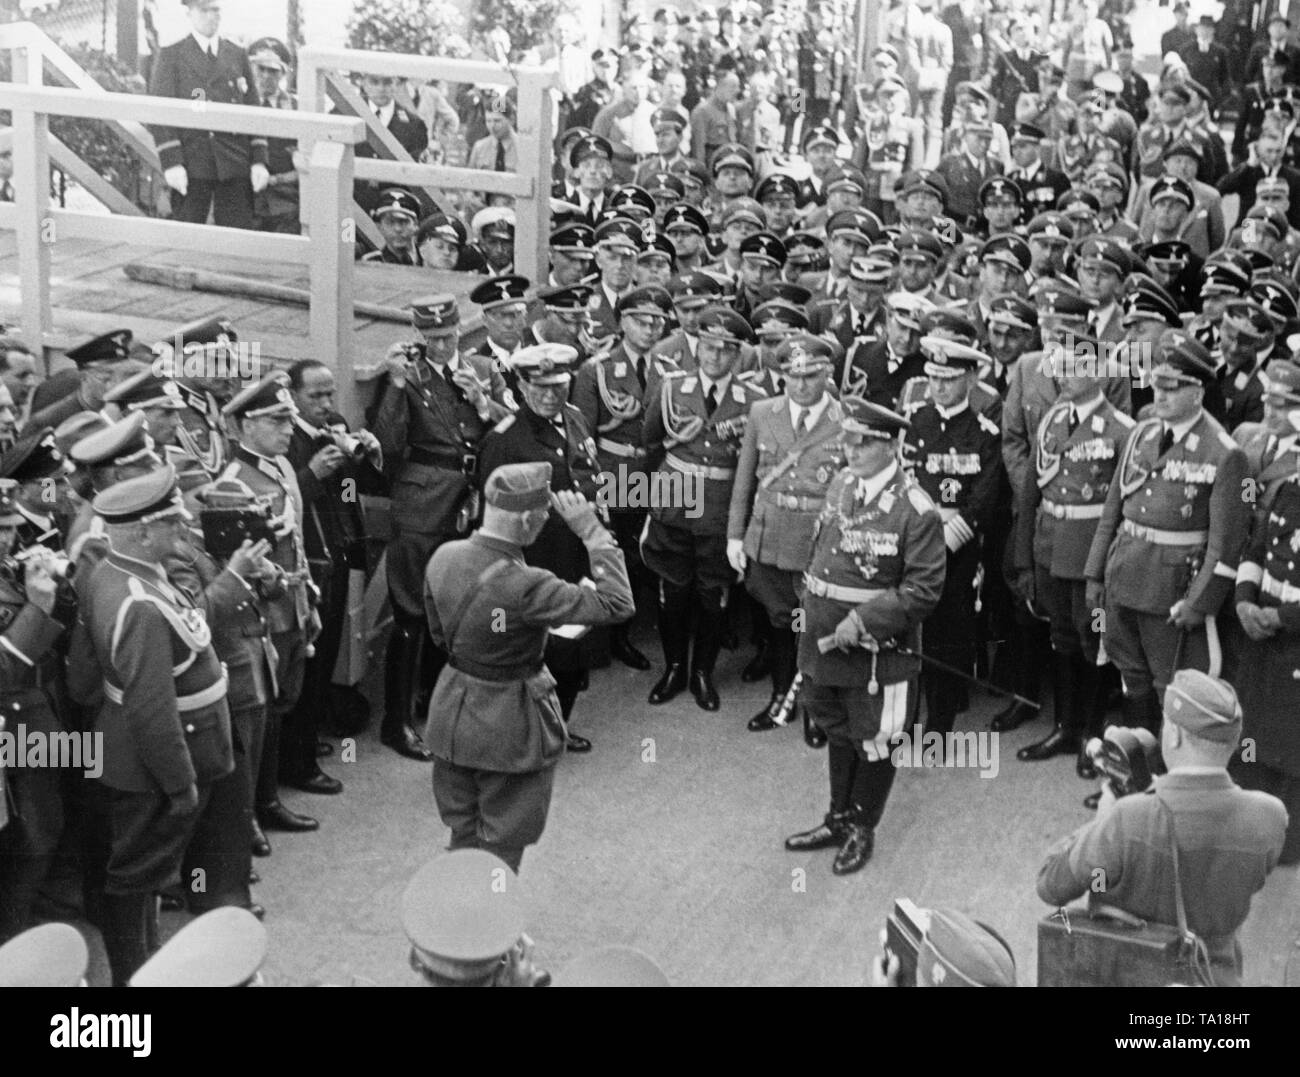 Field Marshal General Hermann Goering, welcomes the commander of the Condor Legion, Major General Wolfram von Richthofen (left, saluting) on the occasion of their return from Spain ton the gangway of the Port of Hamburg in the district of St. Pauli. In the first row, Colonel-General Erhard Milch, Robert Ley and General Admiral Conrad Albrecht, as well as prominent figures of the military. Stock Photo